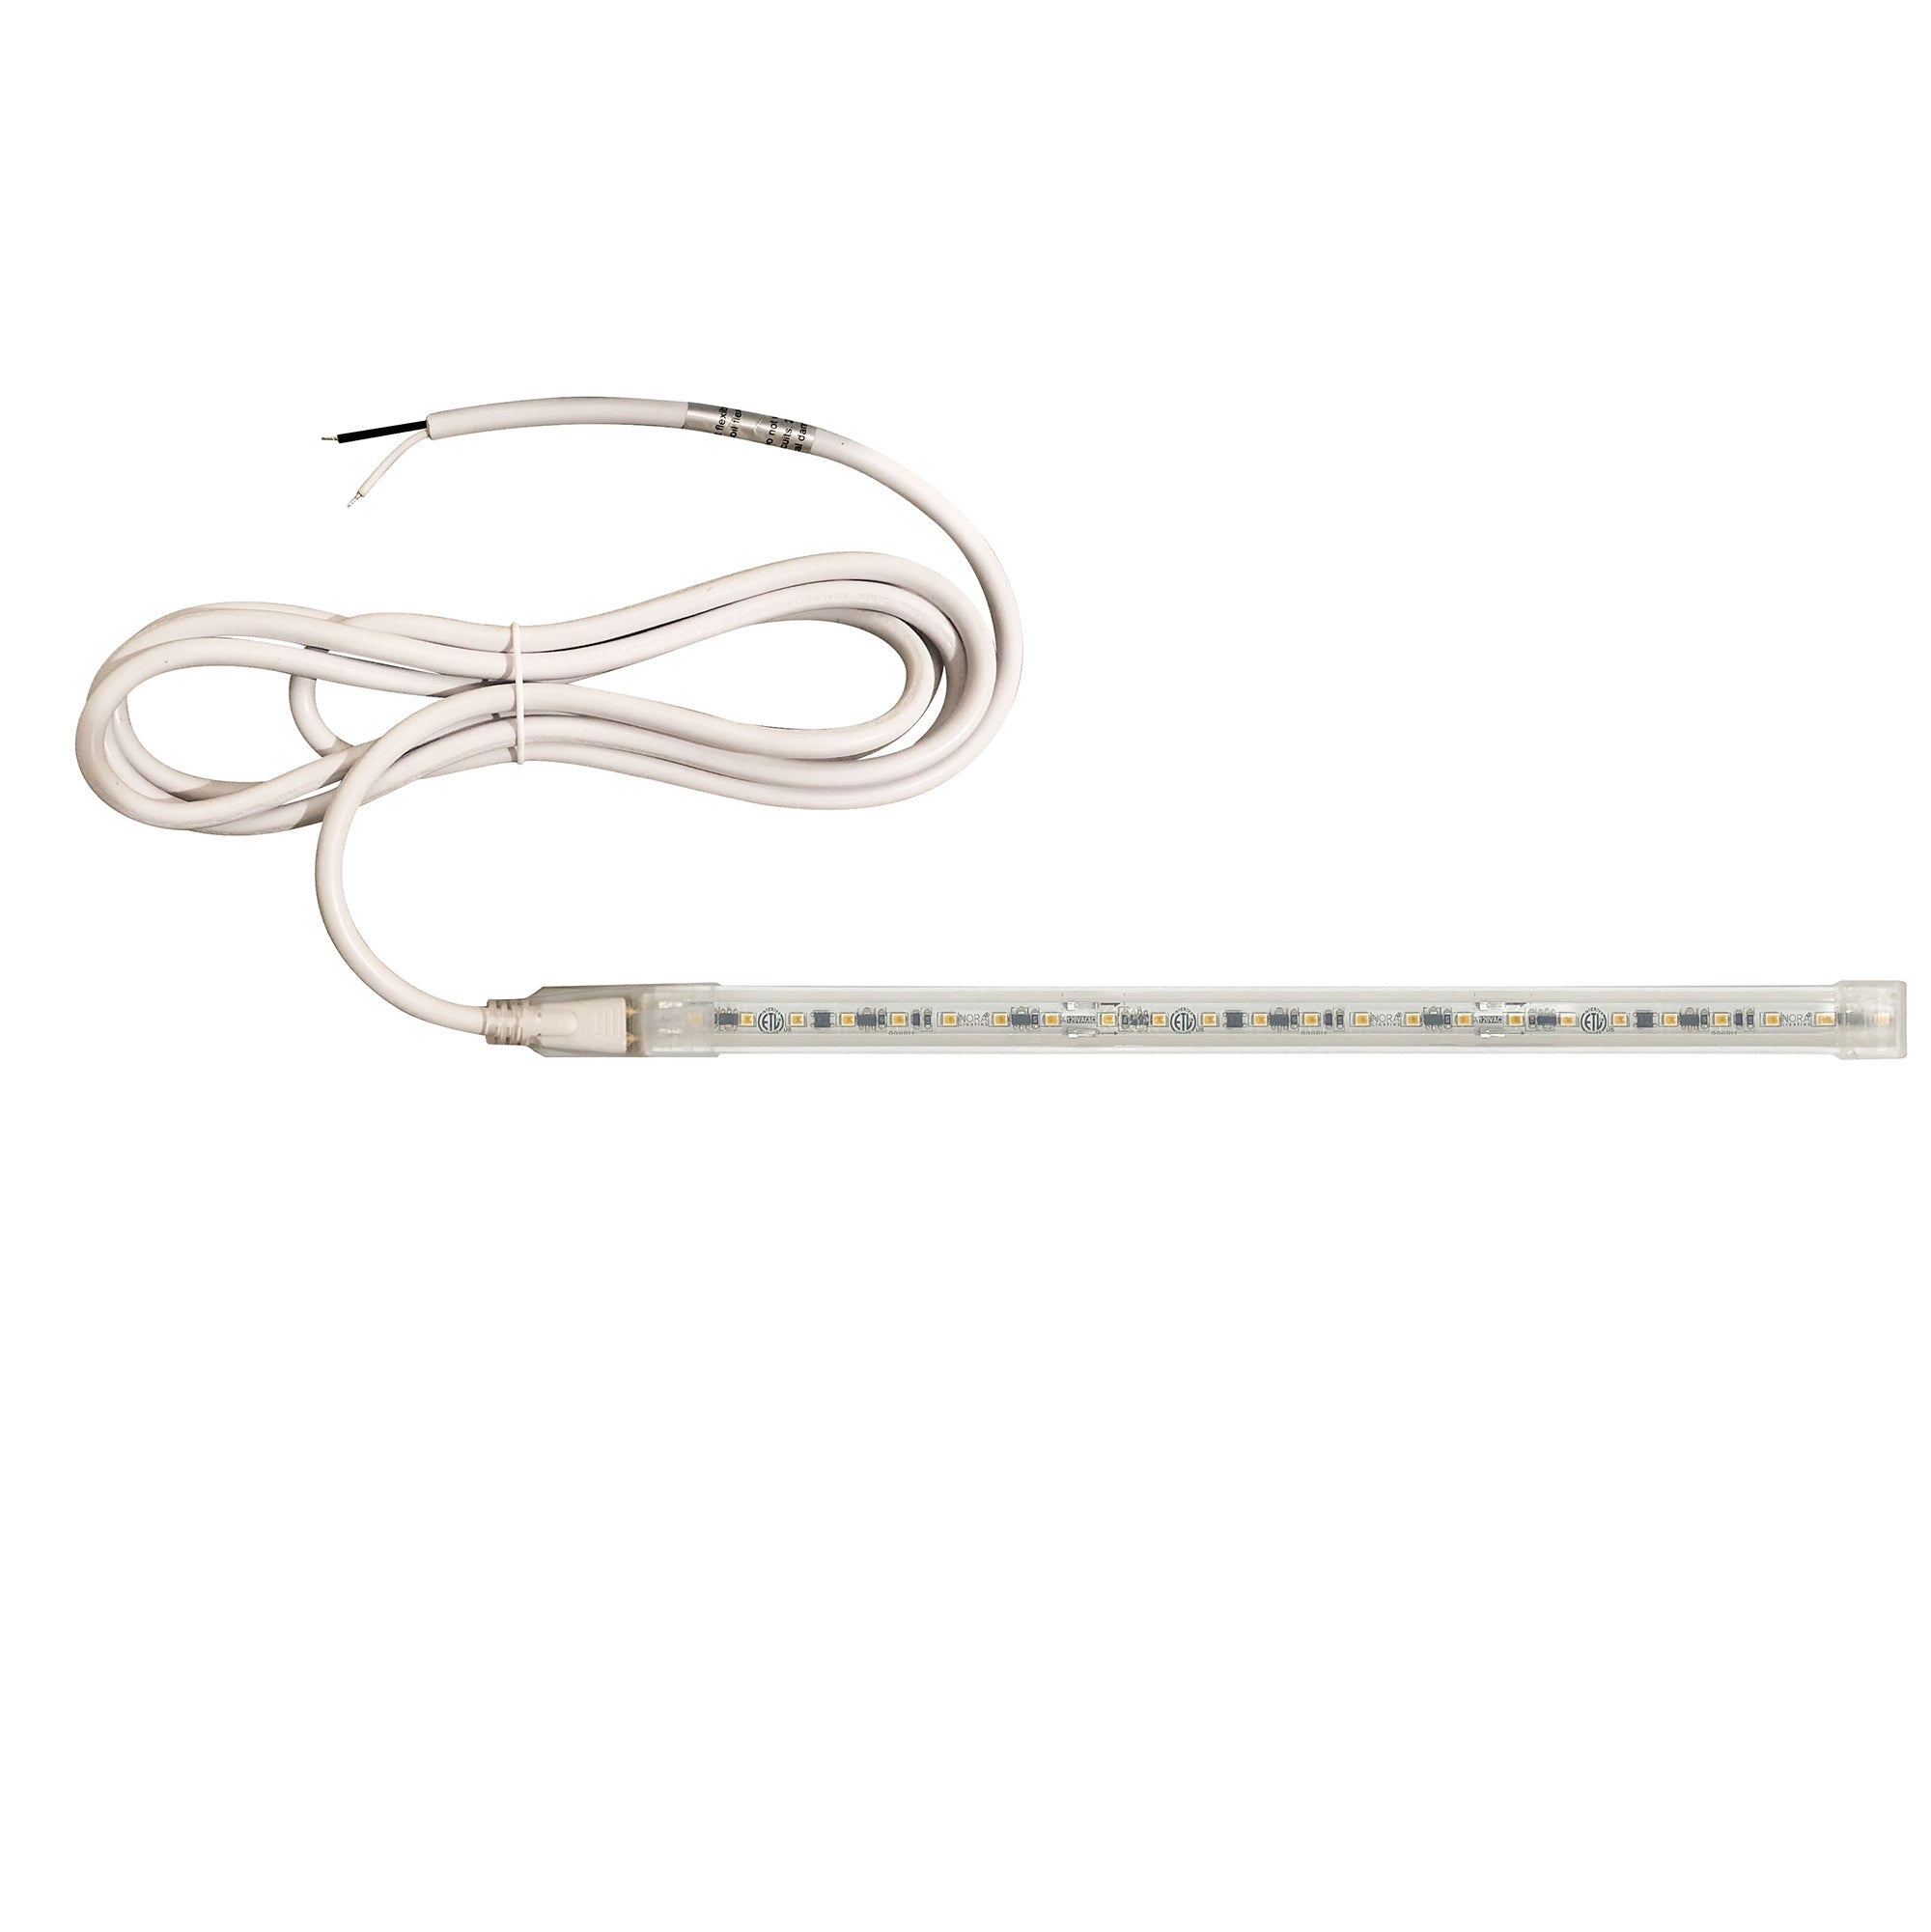 Nora Lighting NUTP13-W69-12-930/HW - Accent / Undercabinet - Custom Cut 69-ft 120V Continuous LED Tape Light, 330lm / 3.6W per foot, 3000K, w/ Mounting Clips and 8' Hardwired Power Cord